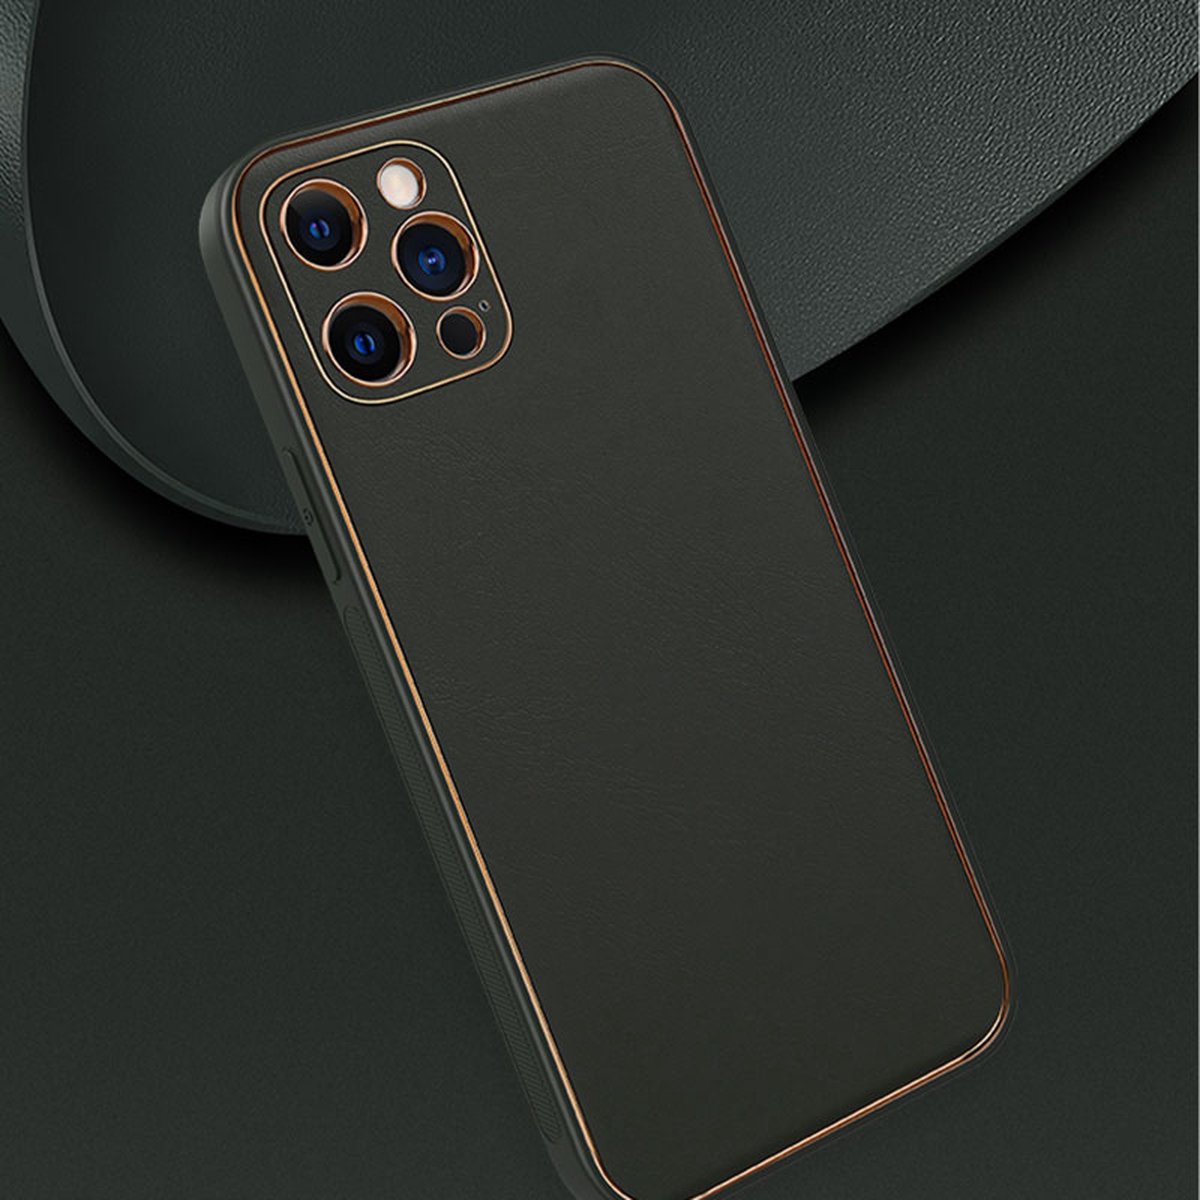 JPM Iphone 12 |Canary Series | Black Color